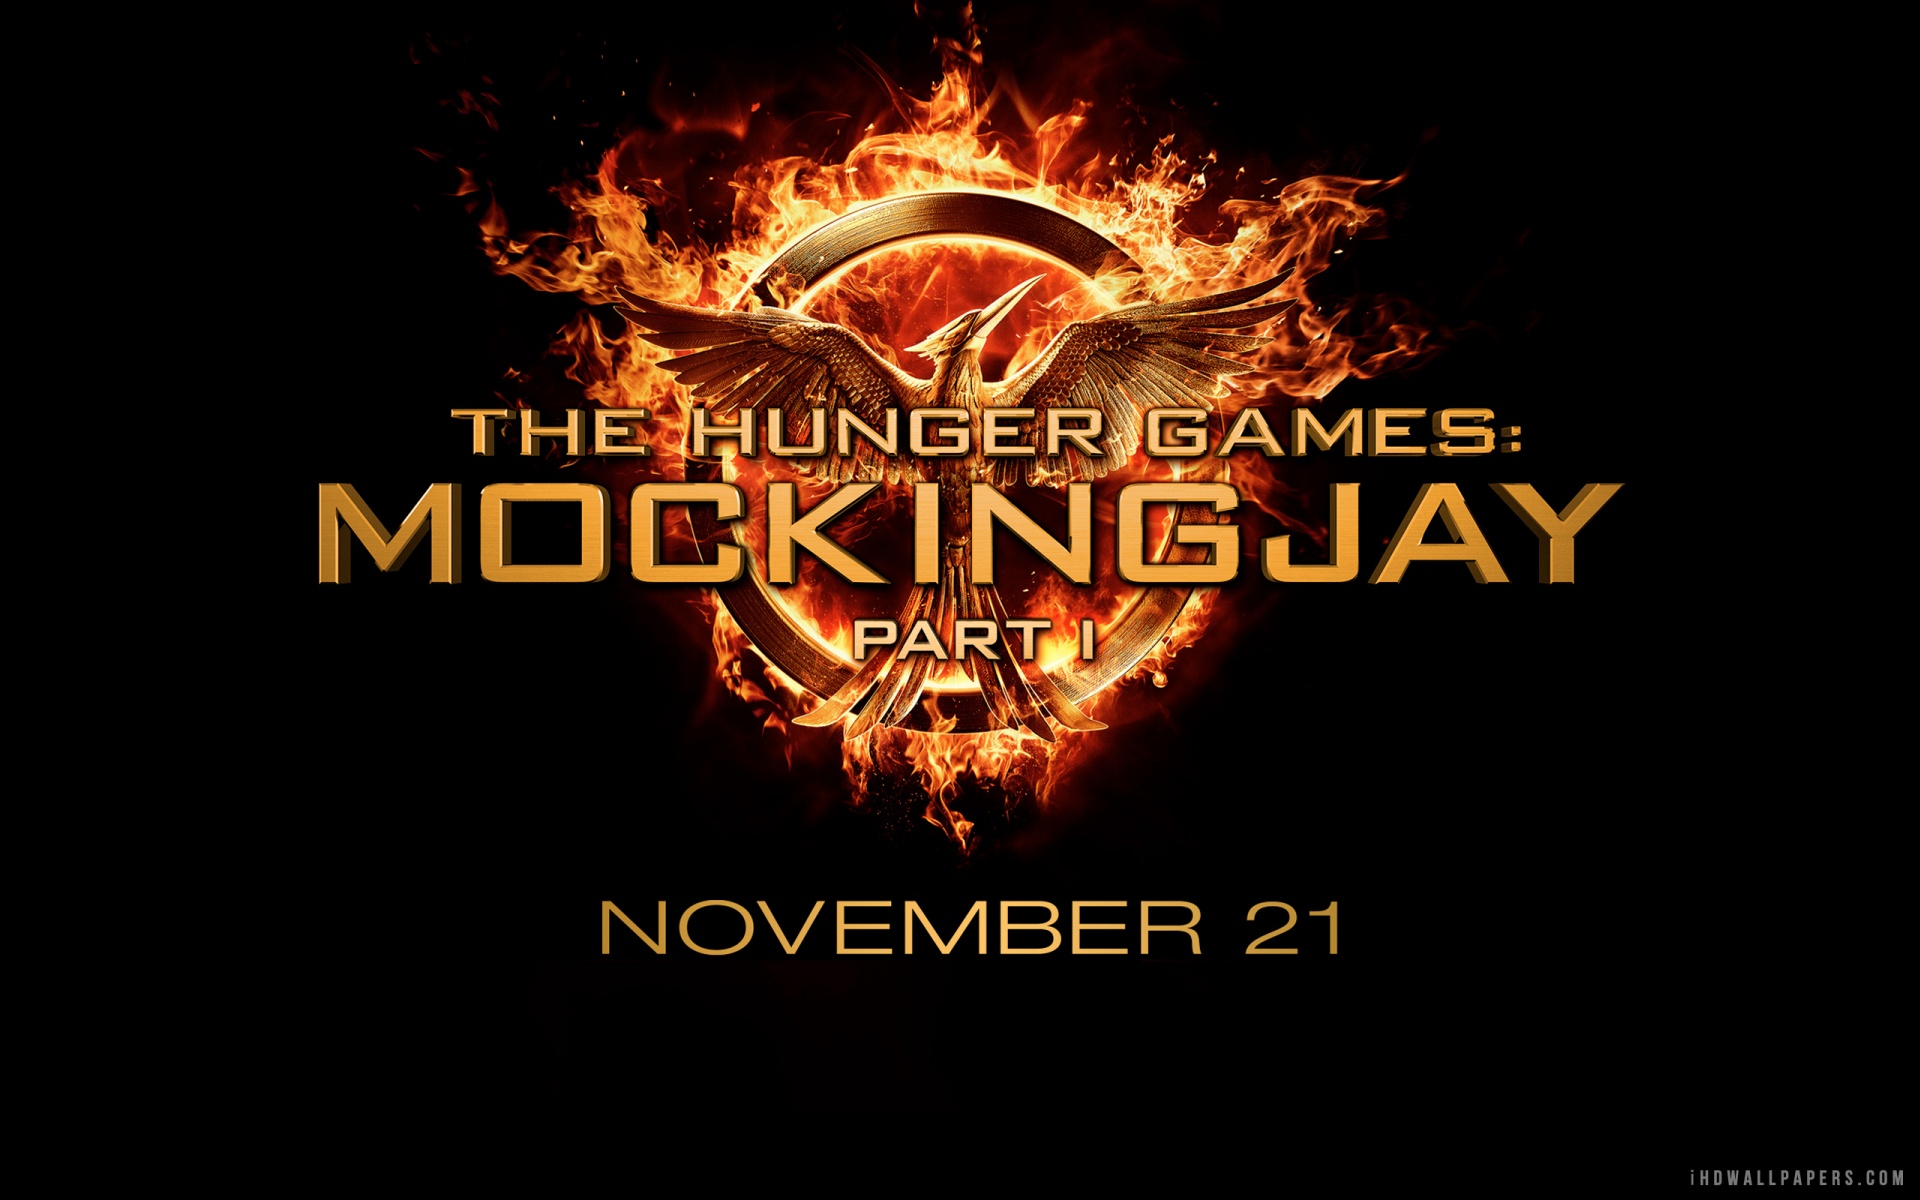 The Hunger Games Mockingjay Part 1 Title HD Wallpaper   iHD Wallpapers 1920x1200